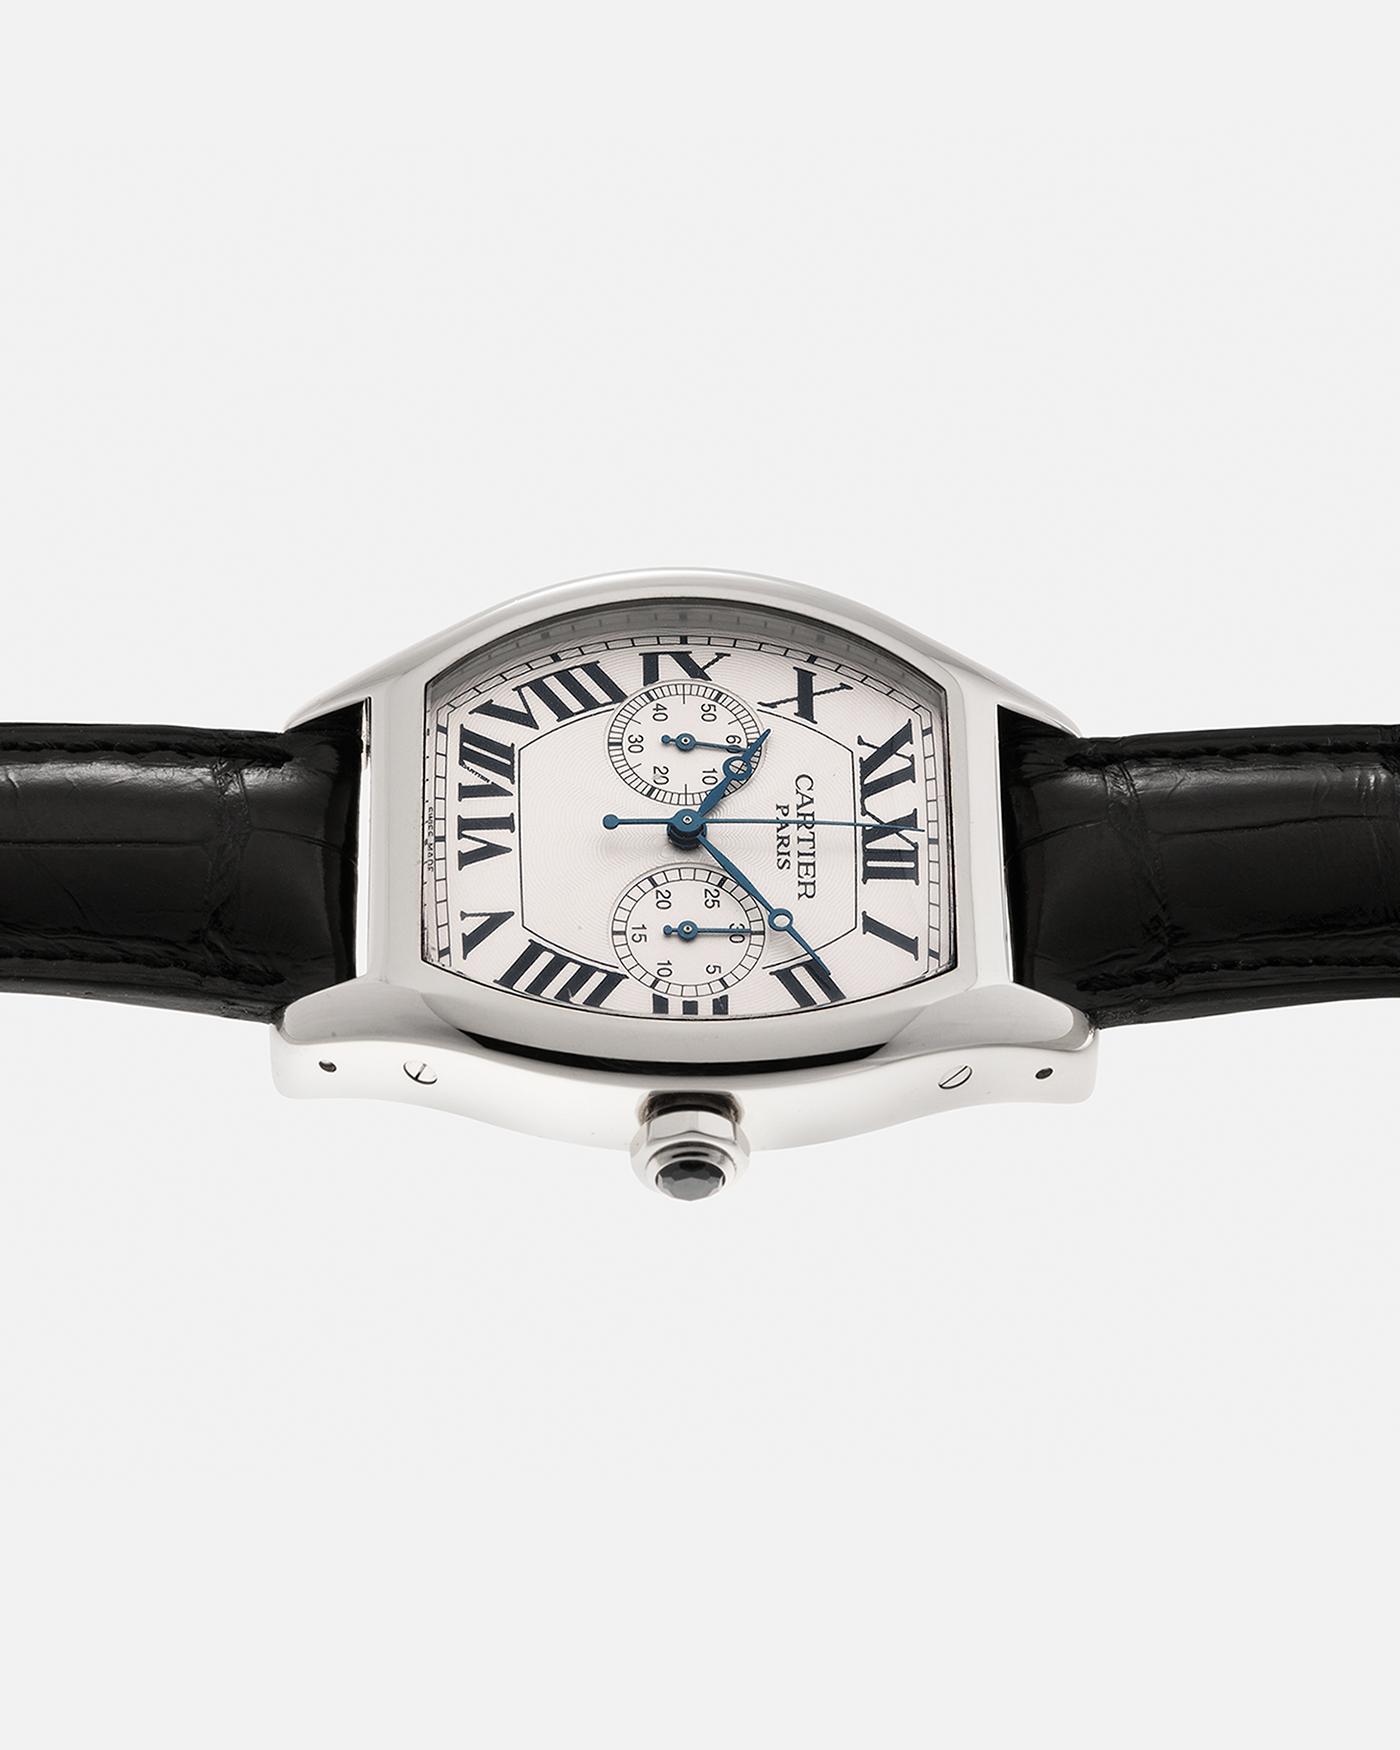 Brand: Cartier Year: 2000s Model: CPCP Collection Prive Tortue Monopoussoir XL Reference: 2762 Material: 18-carat White Gold Movement: THA Cal. 045MC, Manual-Winding Case Dimensions: 37mm x 39 mm Lug Width: 20mm Strap: Jean Rosseau Black Alligator Leather Strap with Signed 18-carat White Gold Deployant Clasp